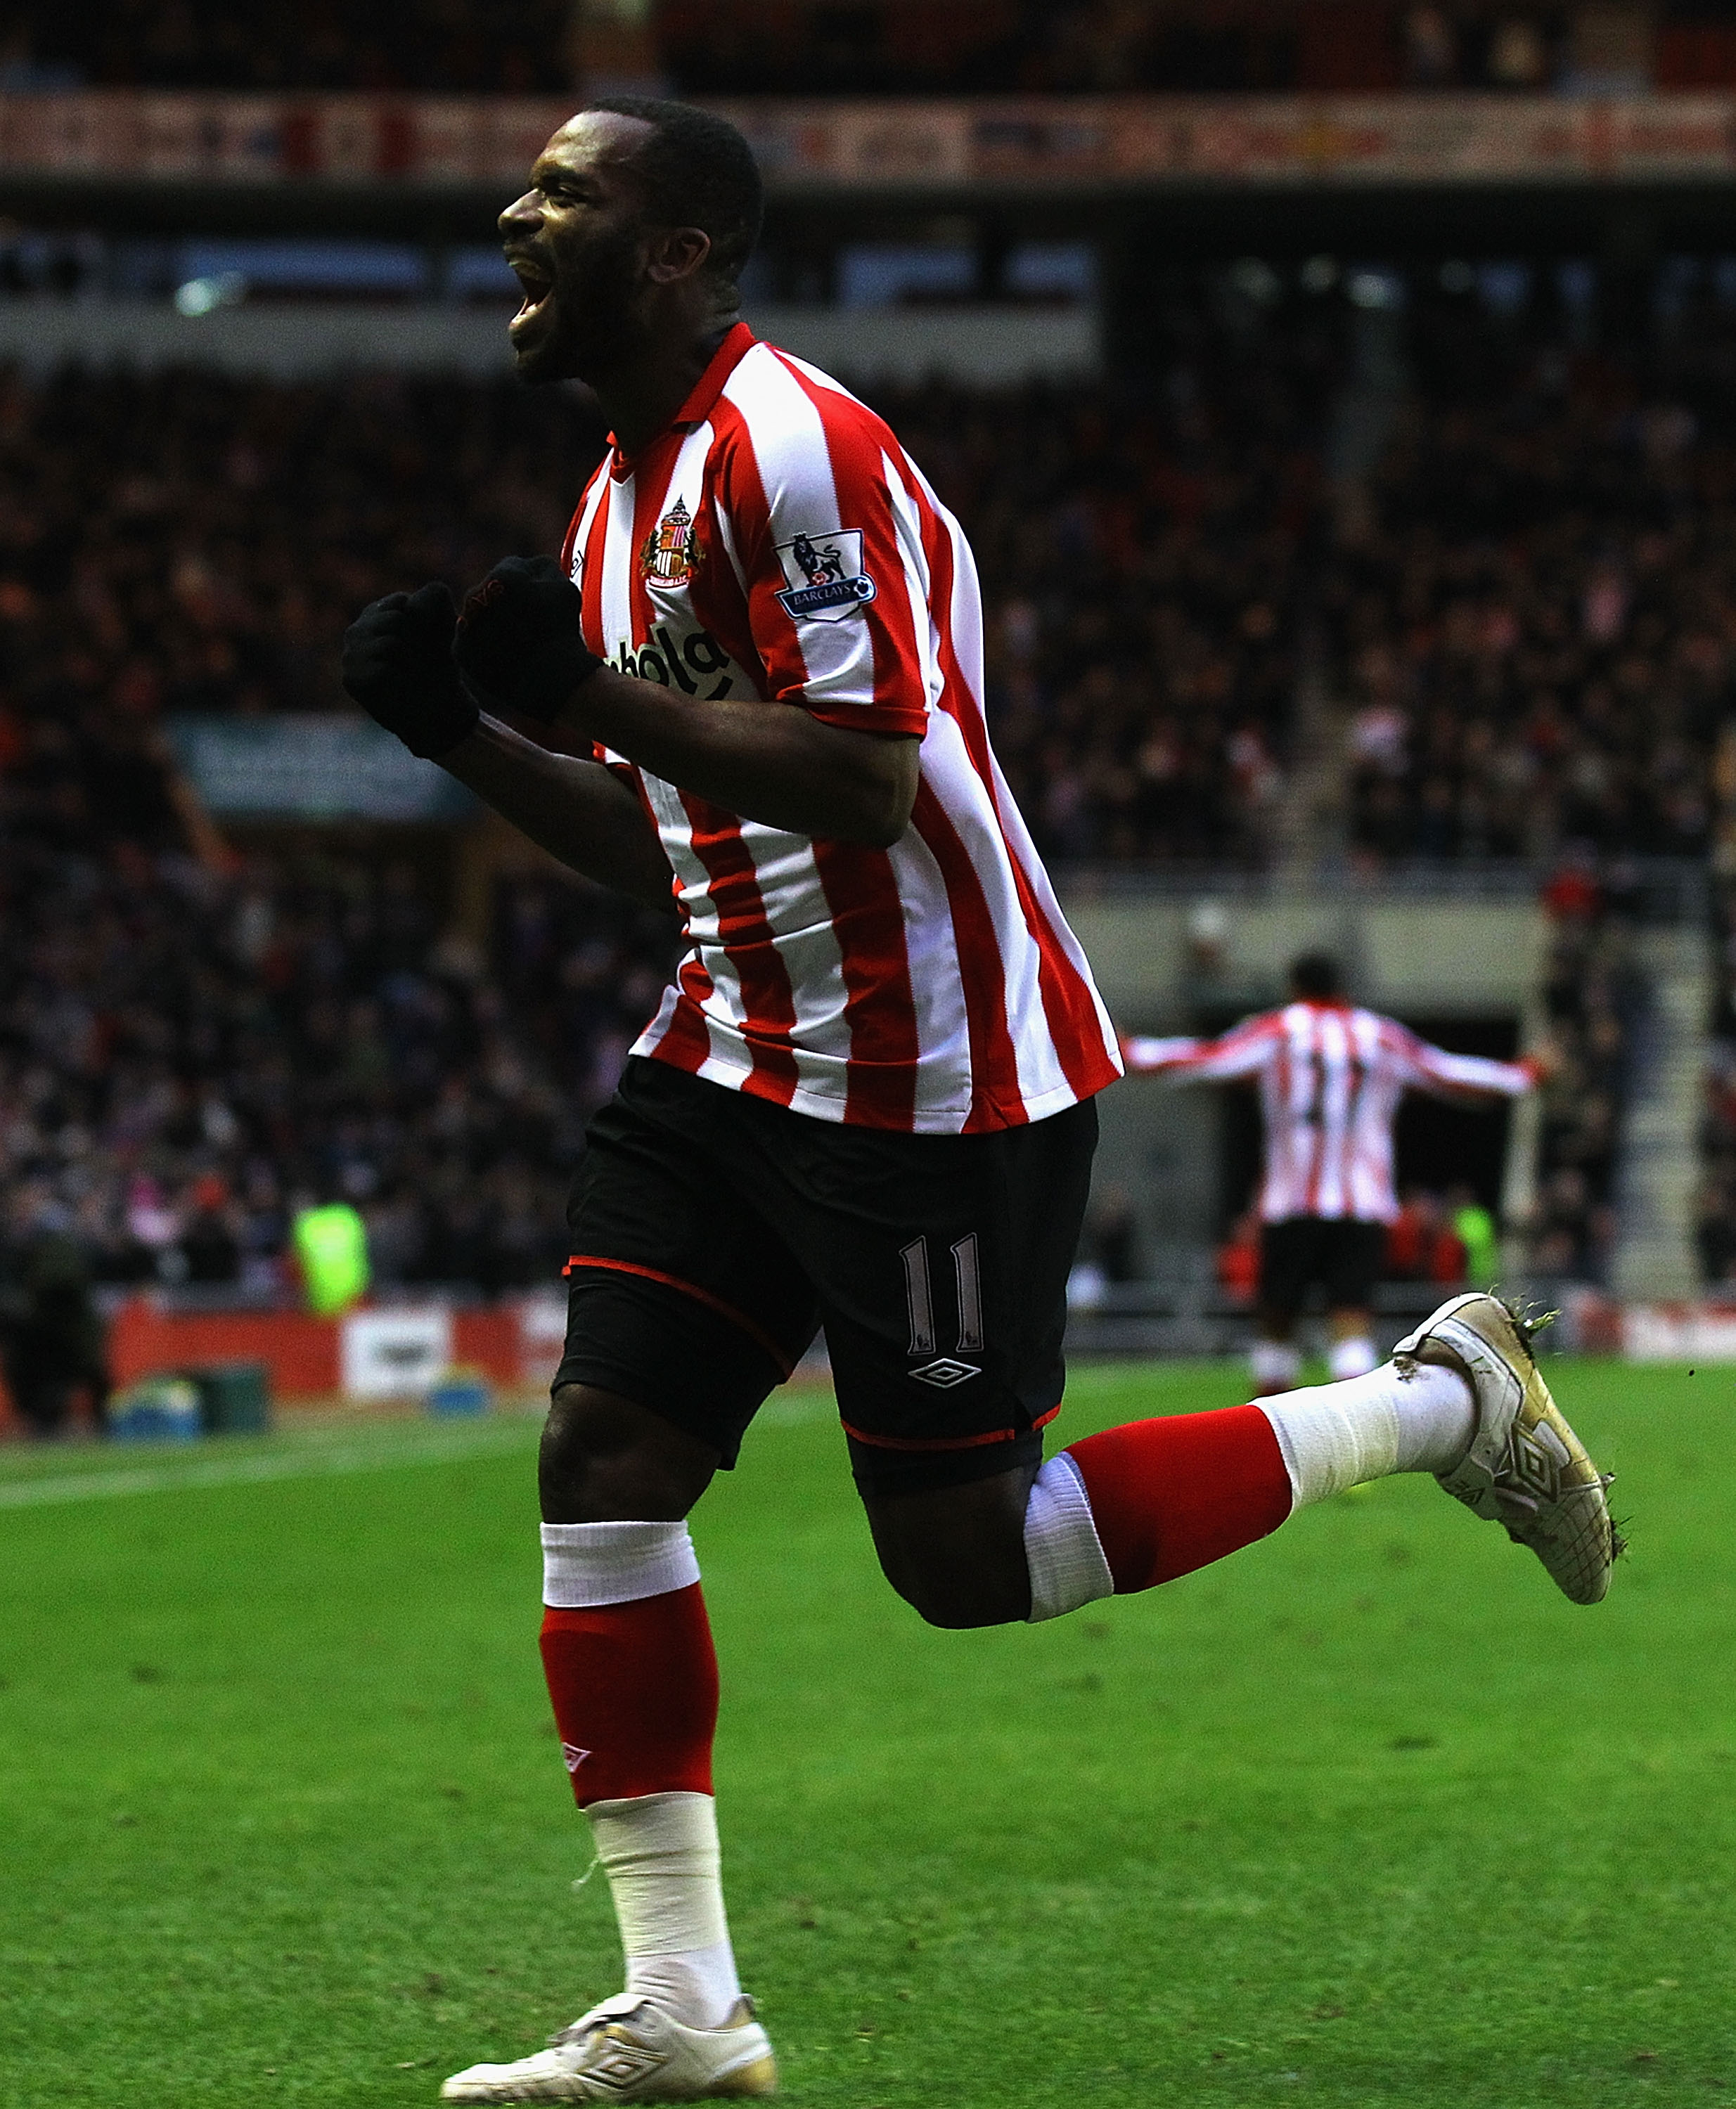 SUNDERLAND, ENGLAND - JANUARY 01:  Darren Bent of Sunderland celebrates his goal during the Barclays Premier League match between Sunderland and Blackburn Rovers at the Stadium of Light on January 1, 2011 in Sunderland, England.  (Photo by Matthew Lewis/G